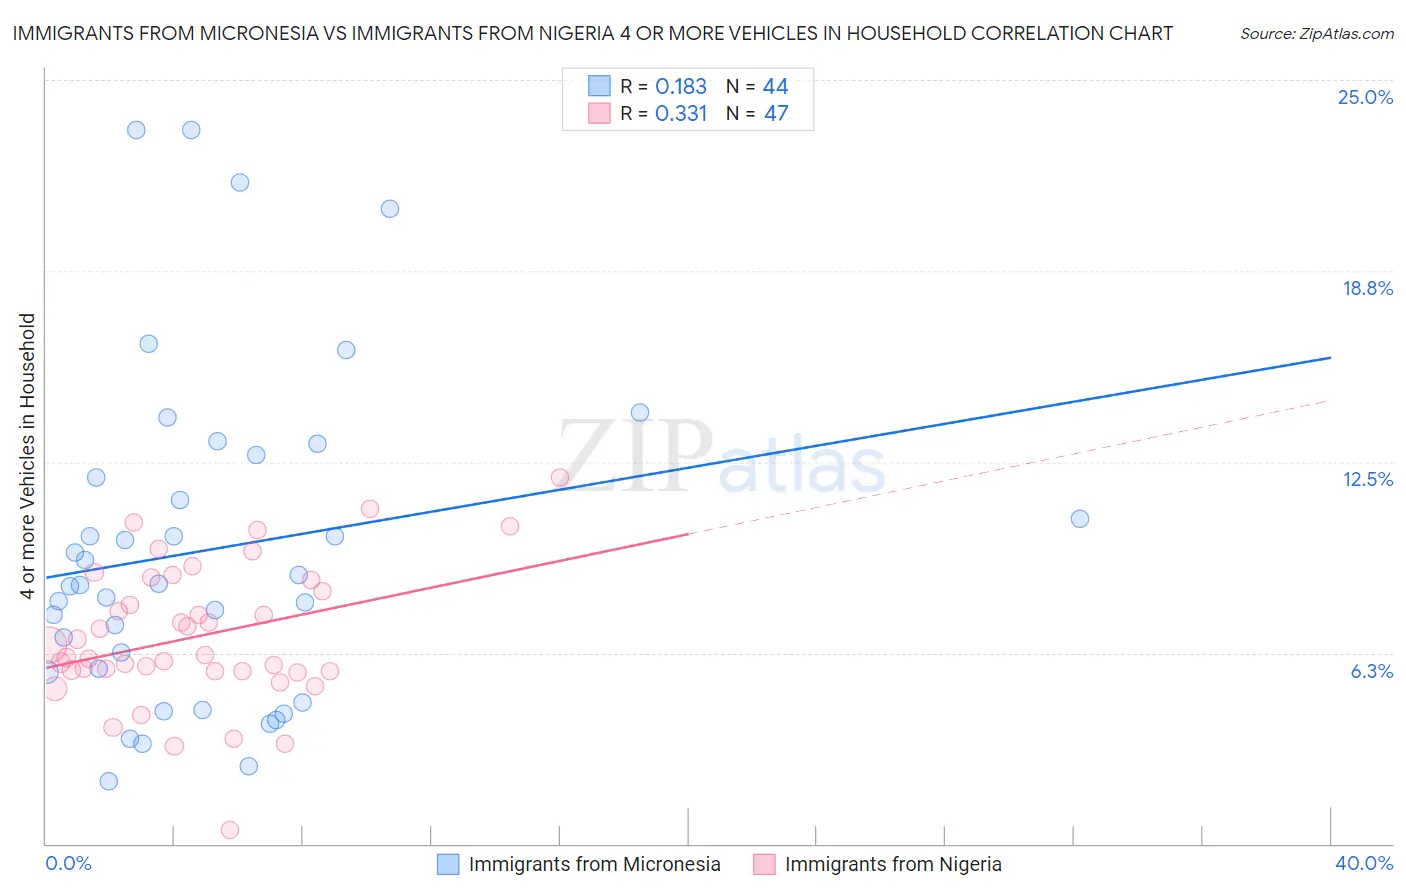 Immigrants from Micronesia vs Immigrants from Nigeria 4 or more Vehicles in Household